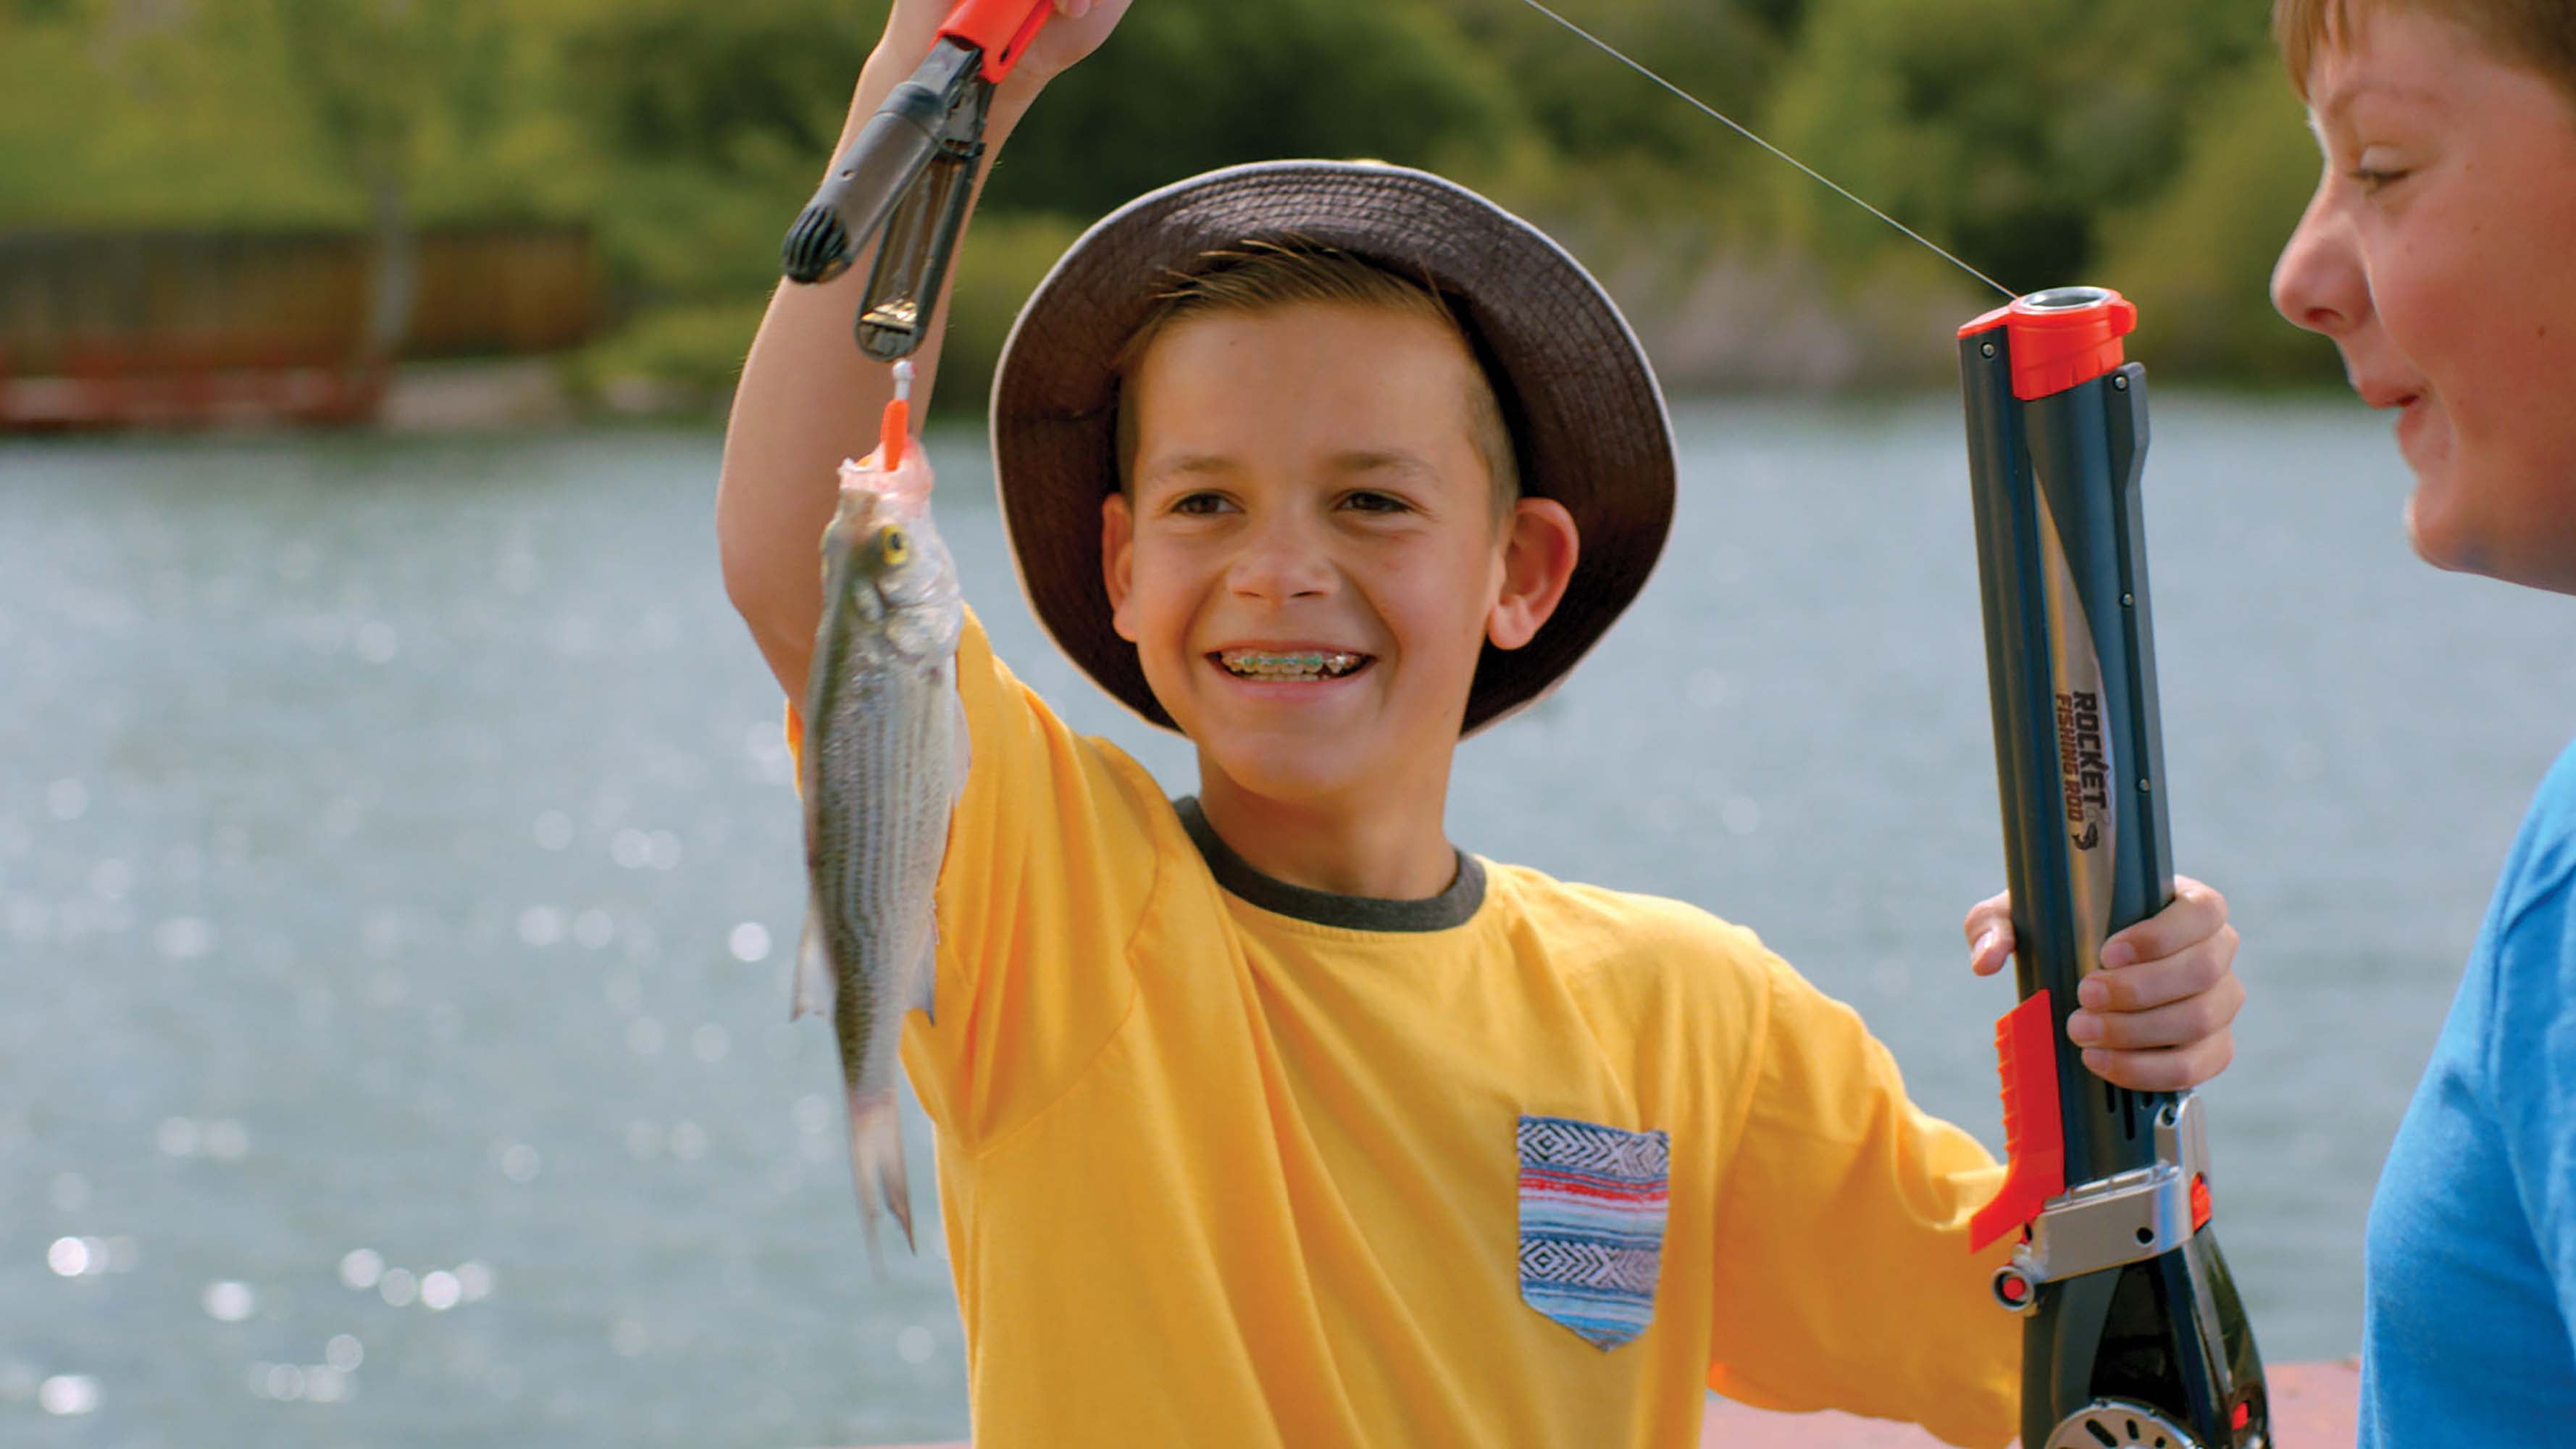 Ready to Fish Kids Fishing Pole for sale online Goliath Rocket Fishing Rod